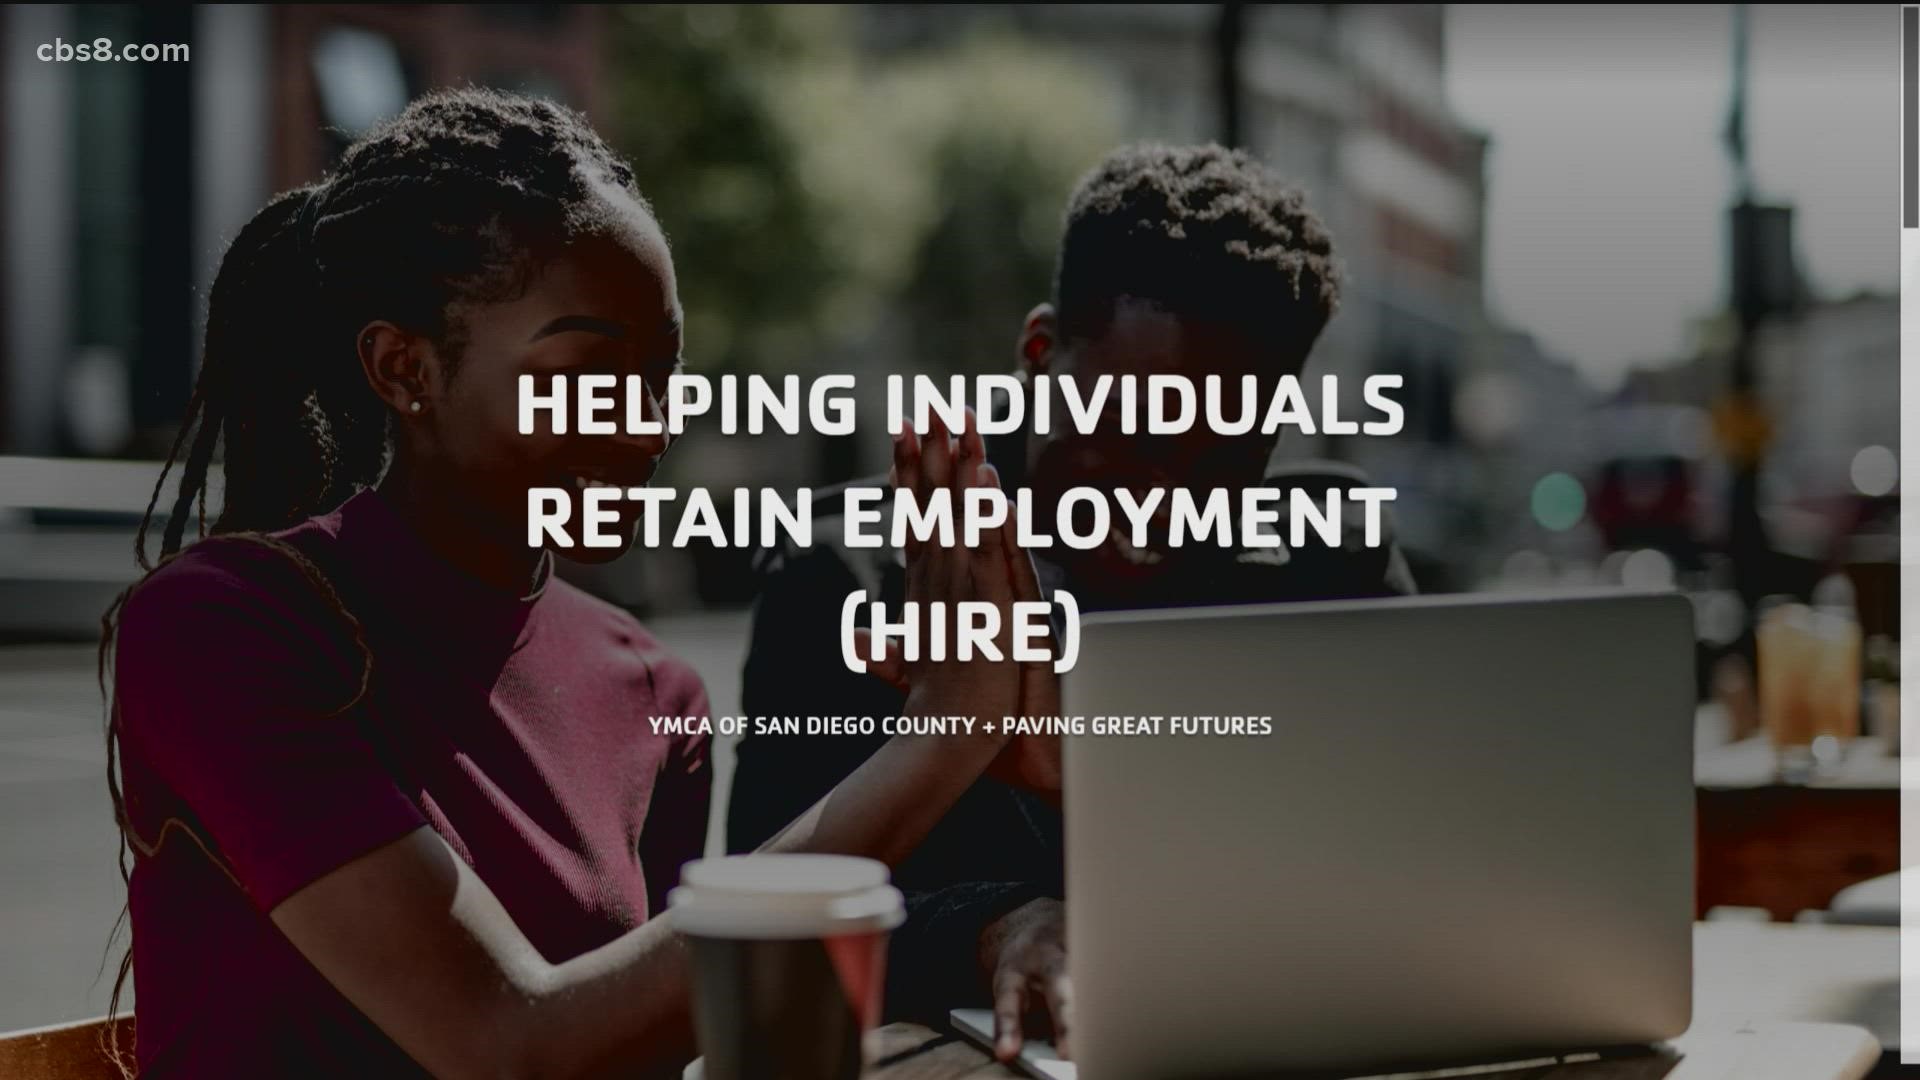 HIRE aims to equip 16-24 year-olds with economic mobility